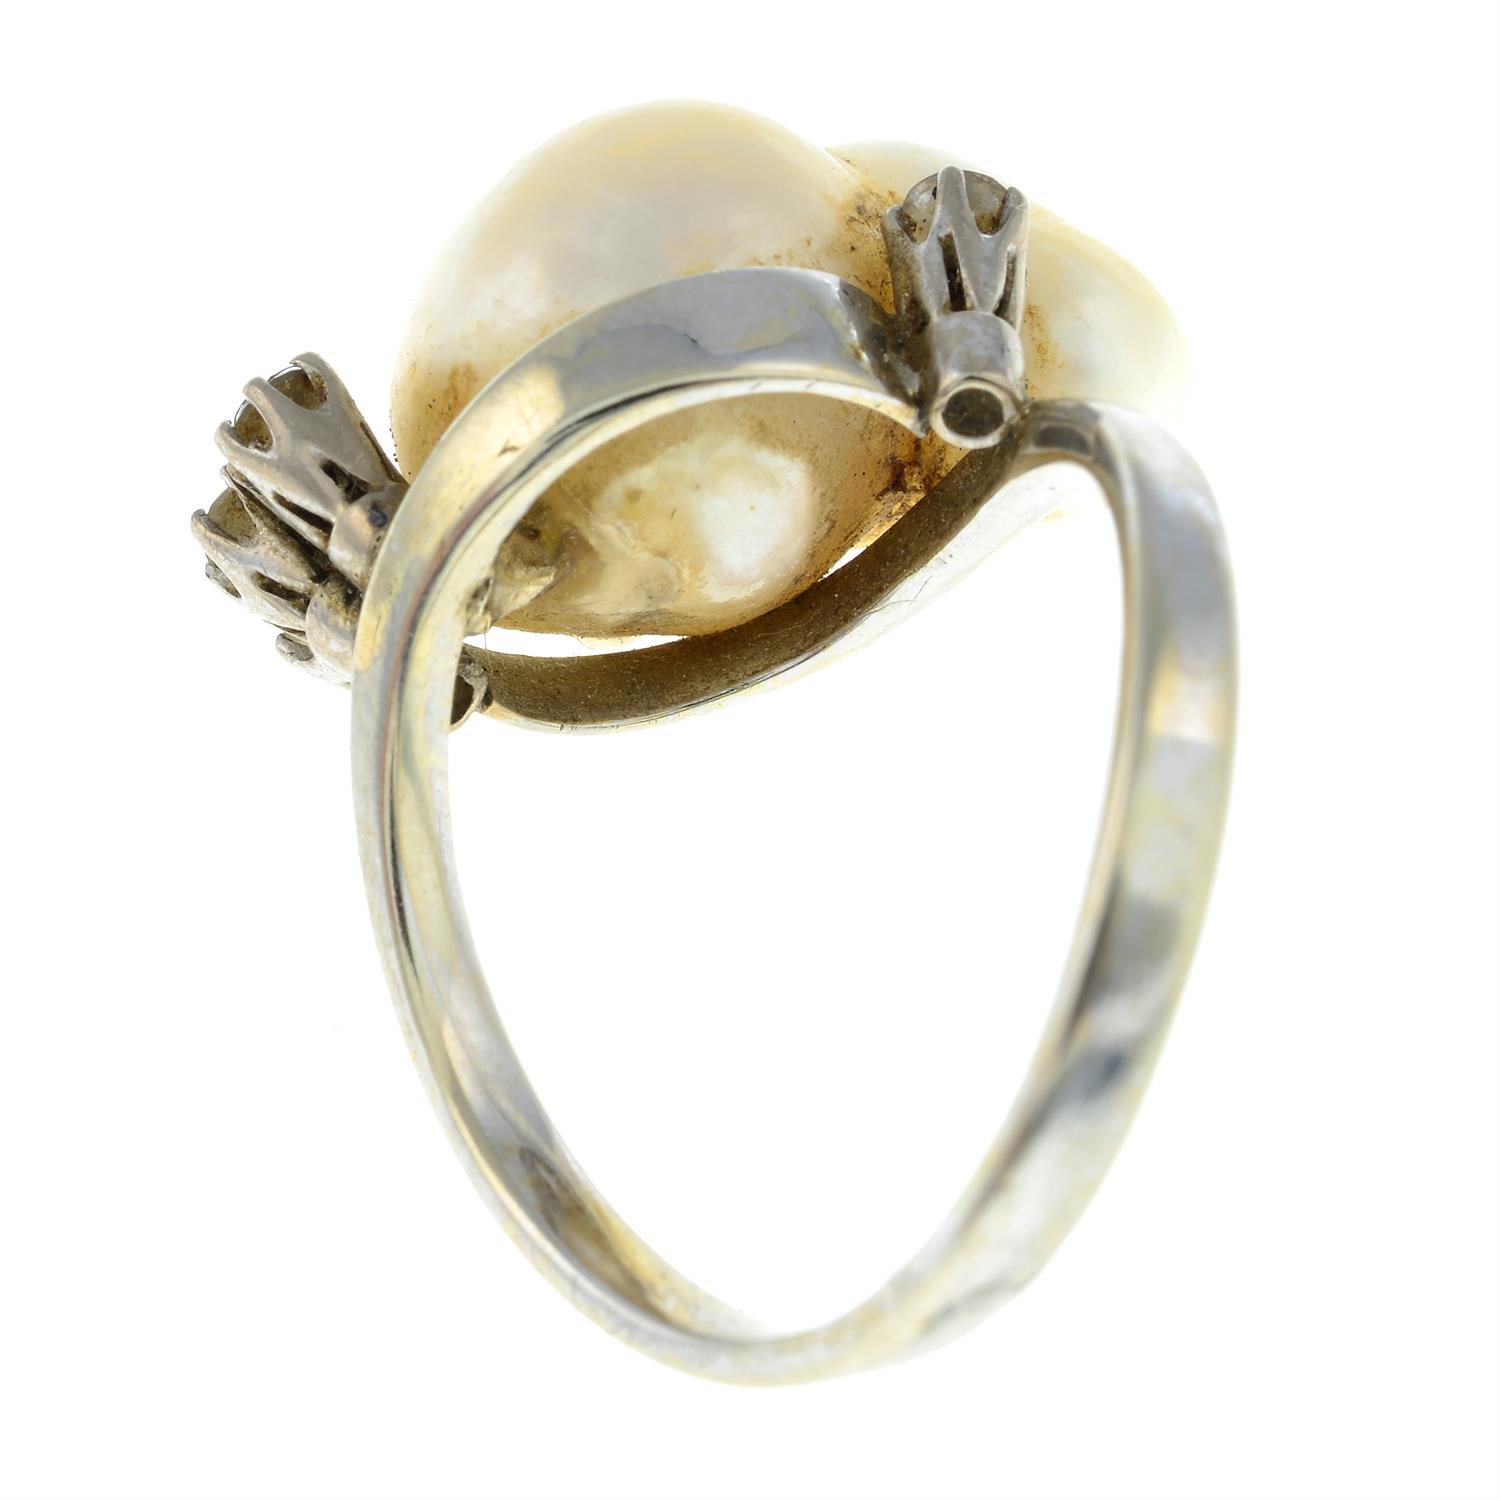 Baroque cultured pearl and diamond dress ring - Image 2 of 2